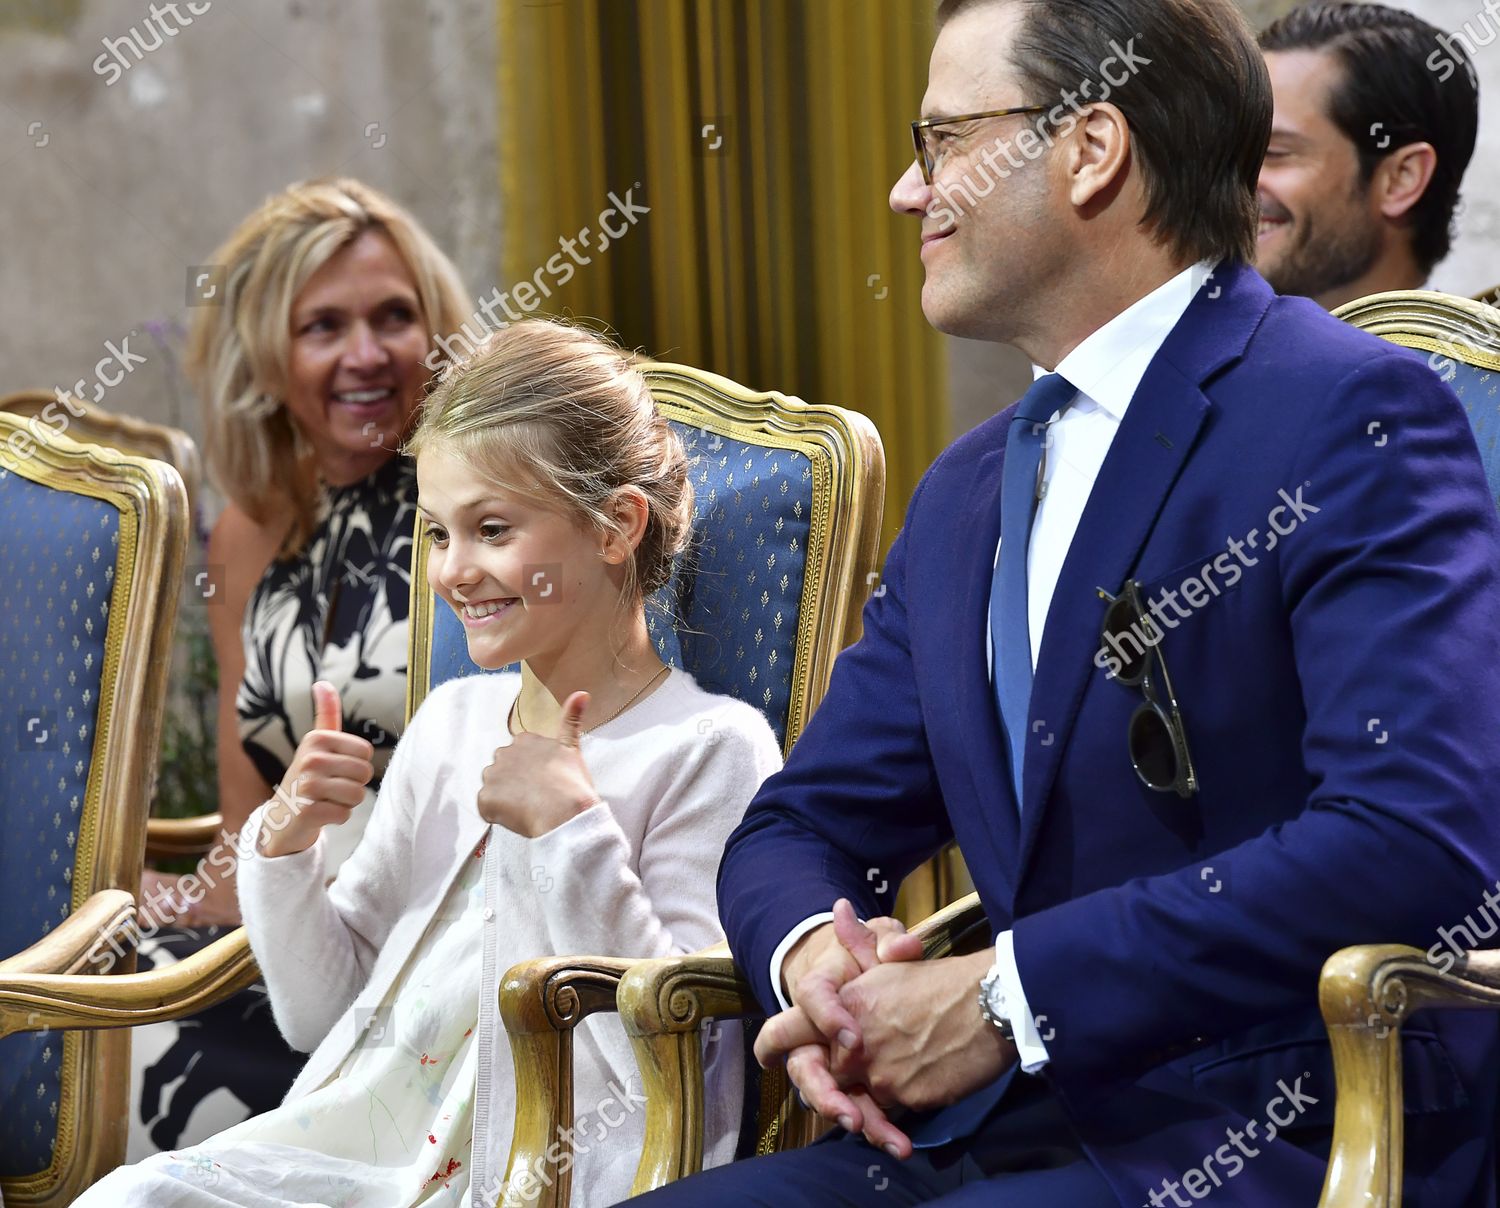 victoria-crown-princess-of-sweden-birthday-celebrations-solliden-palace-borgholm-sweden-shutterstock-editorial-10711483be.jpg